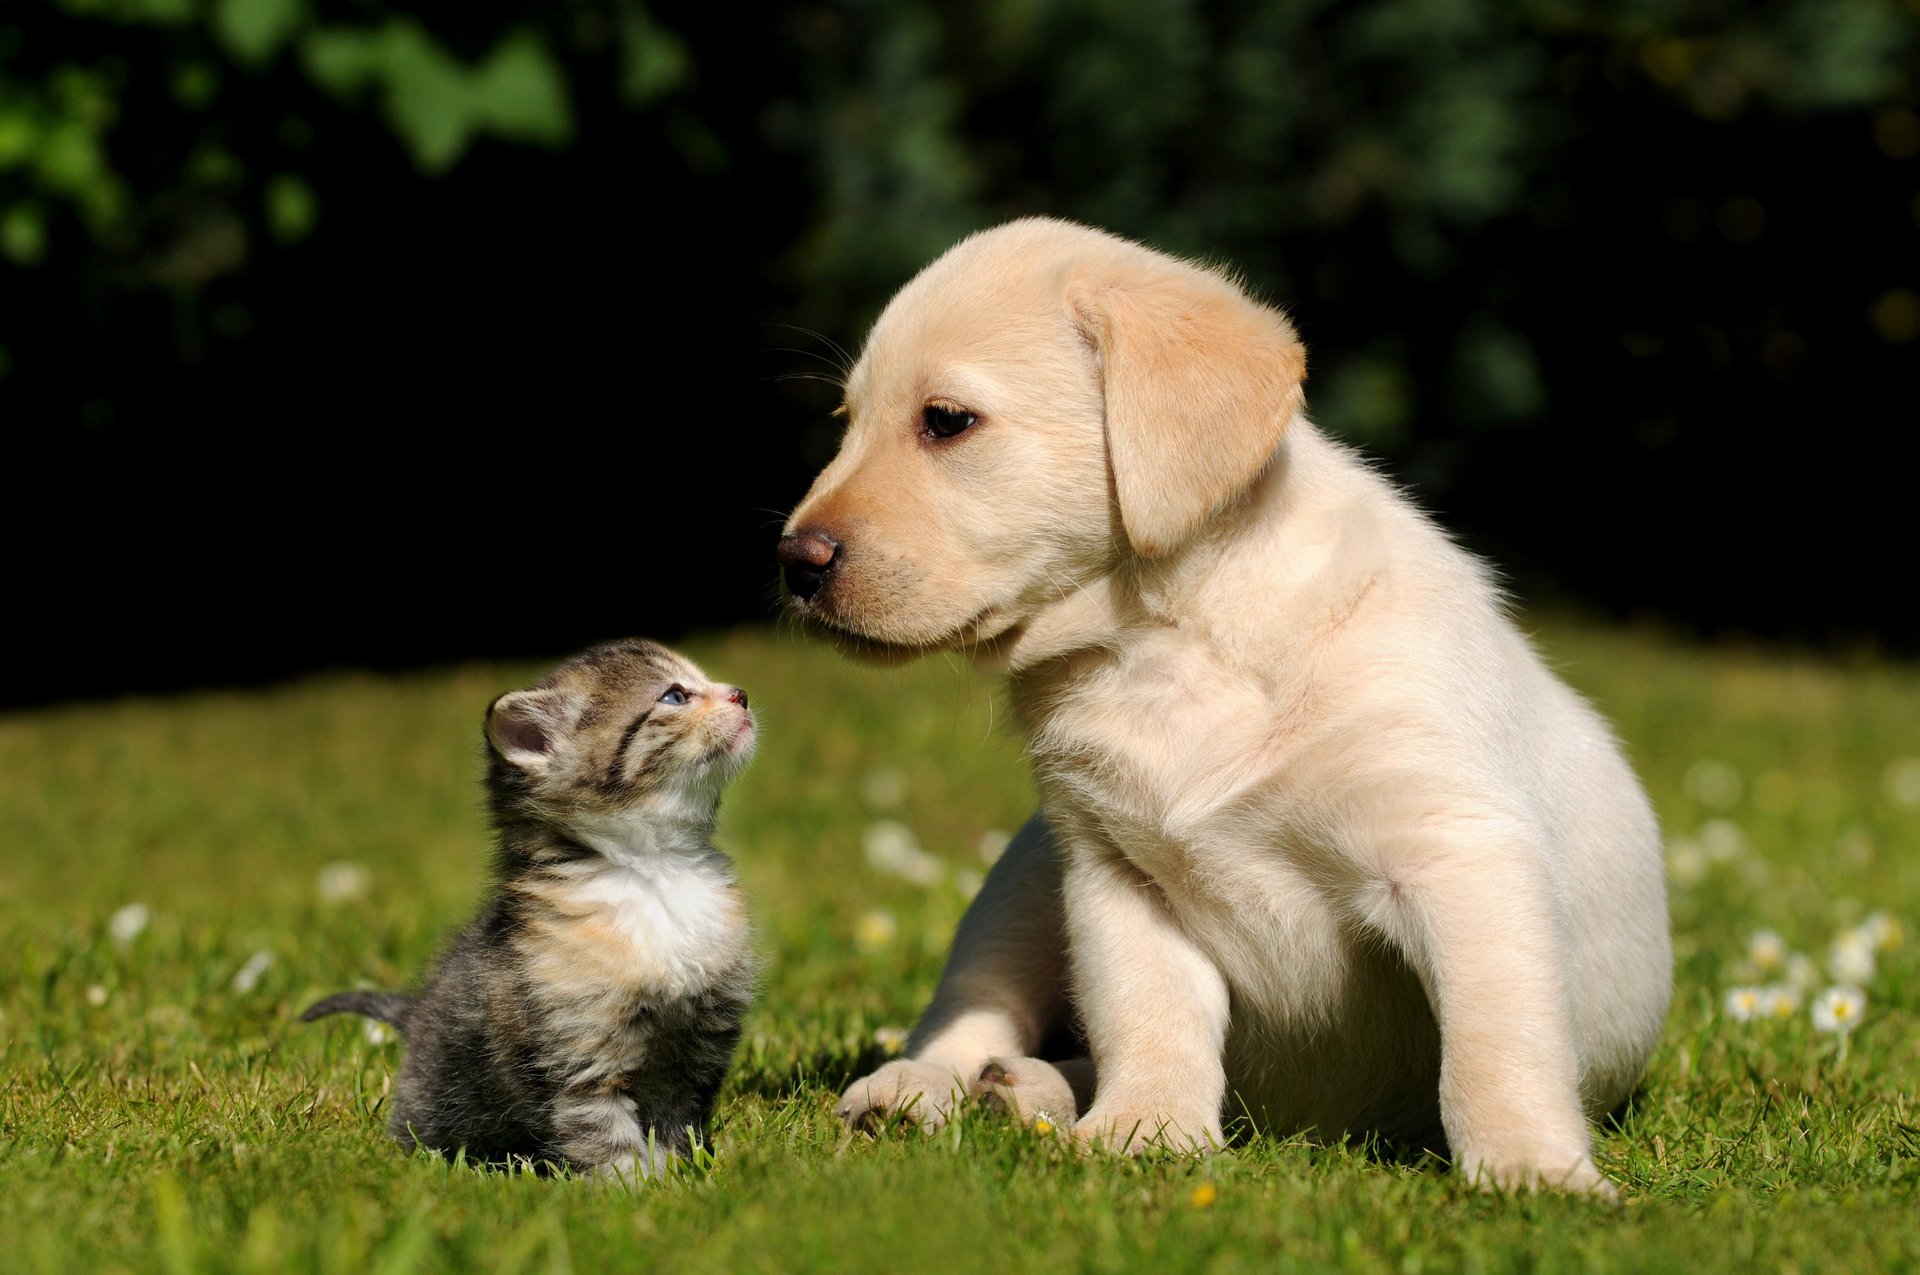 A labrador puppy with a striped kitten